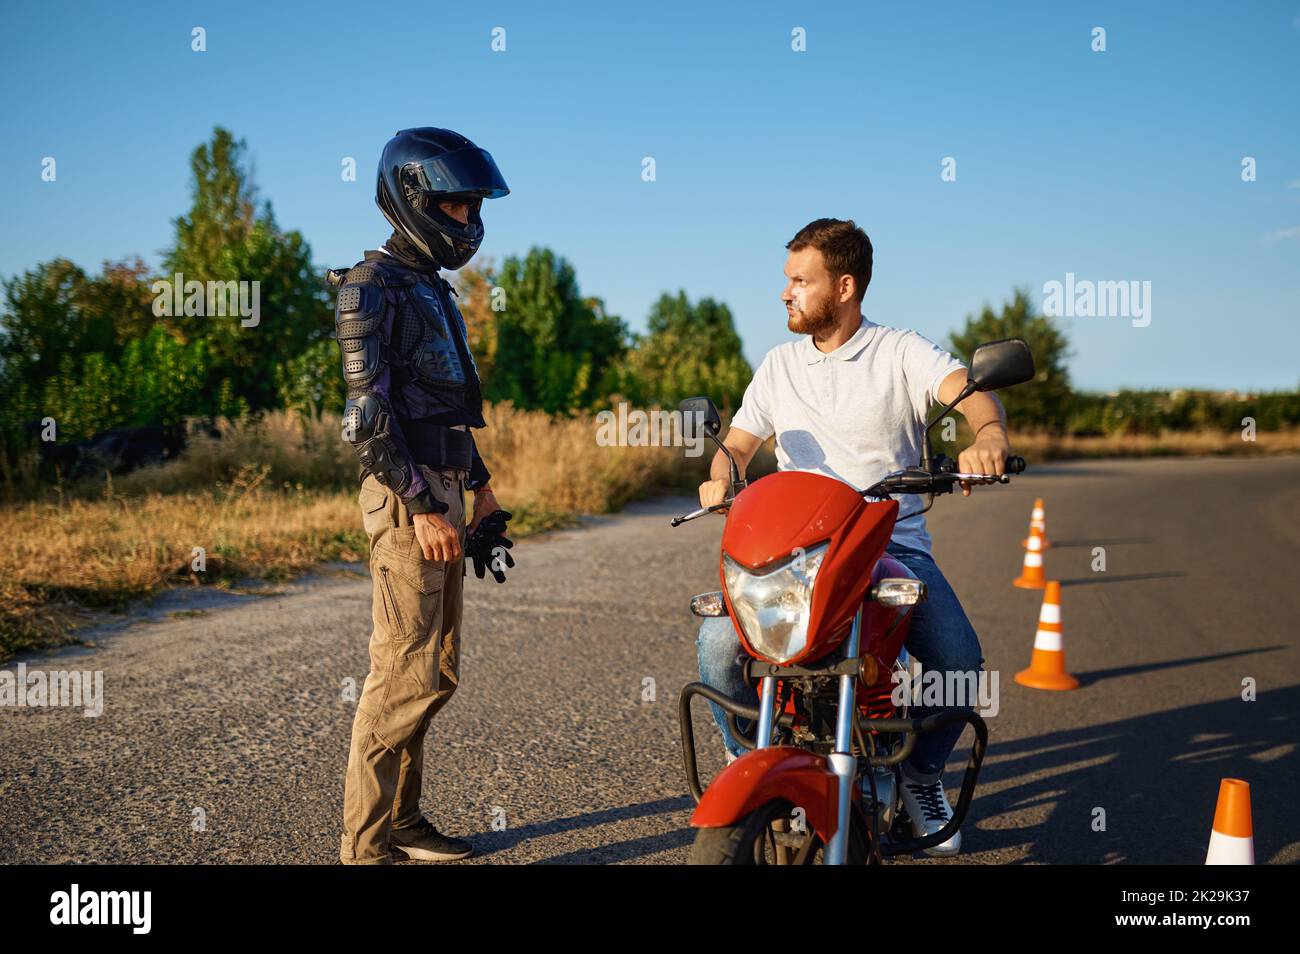 Male student and instructor, lesson on motordrome Stock Photo